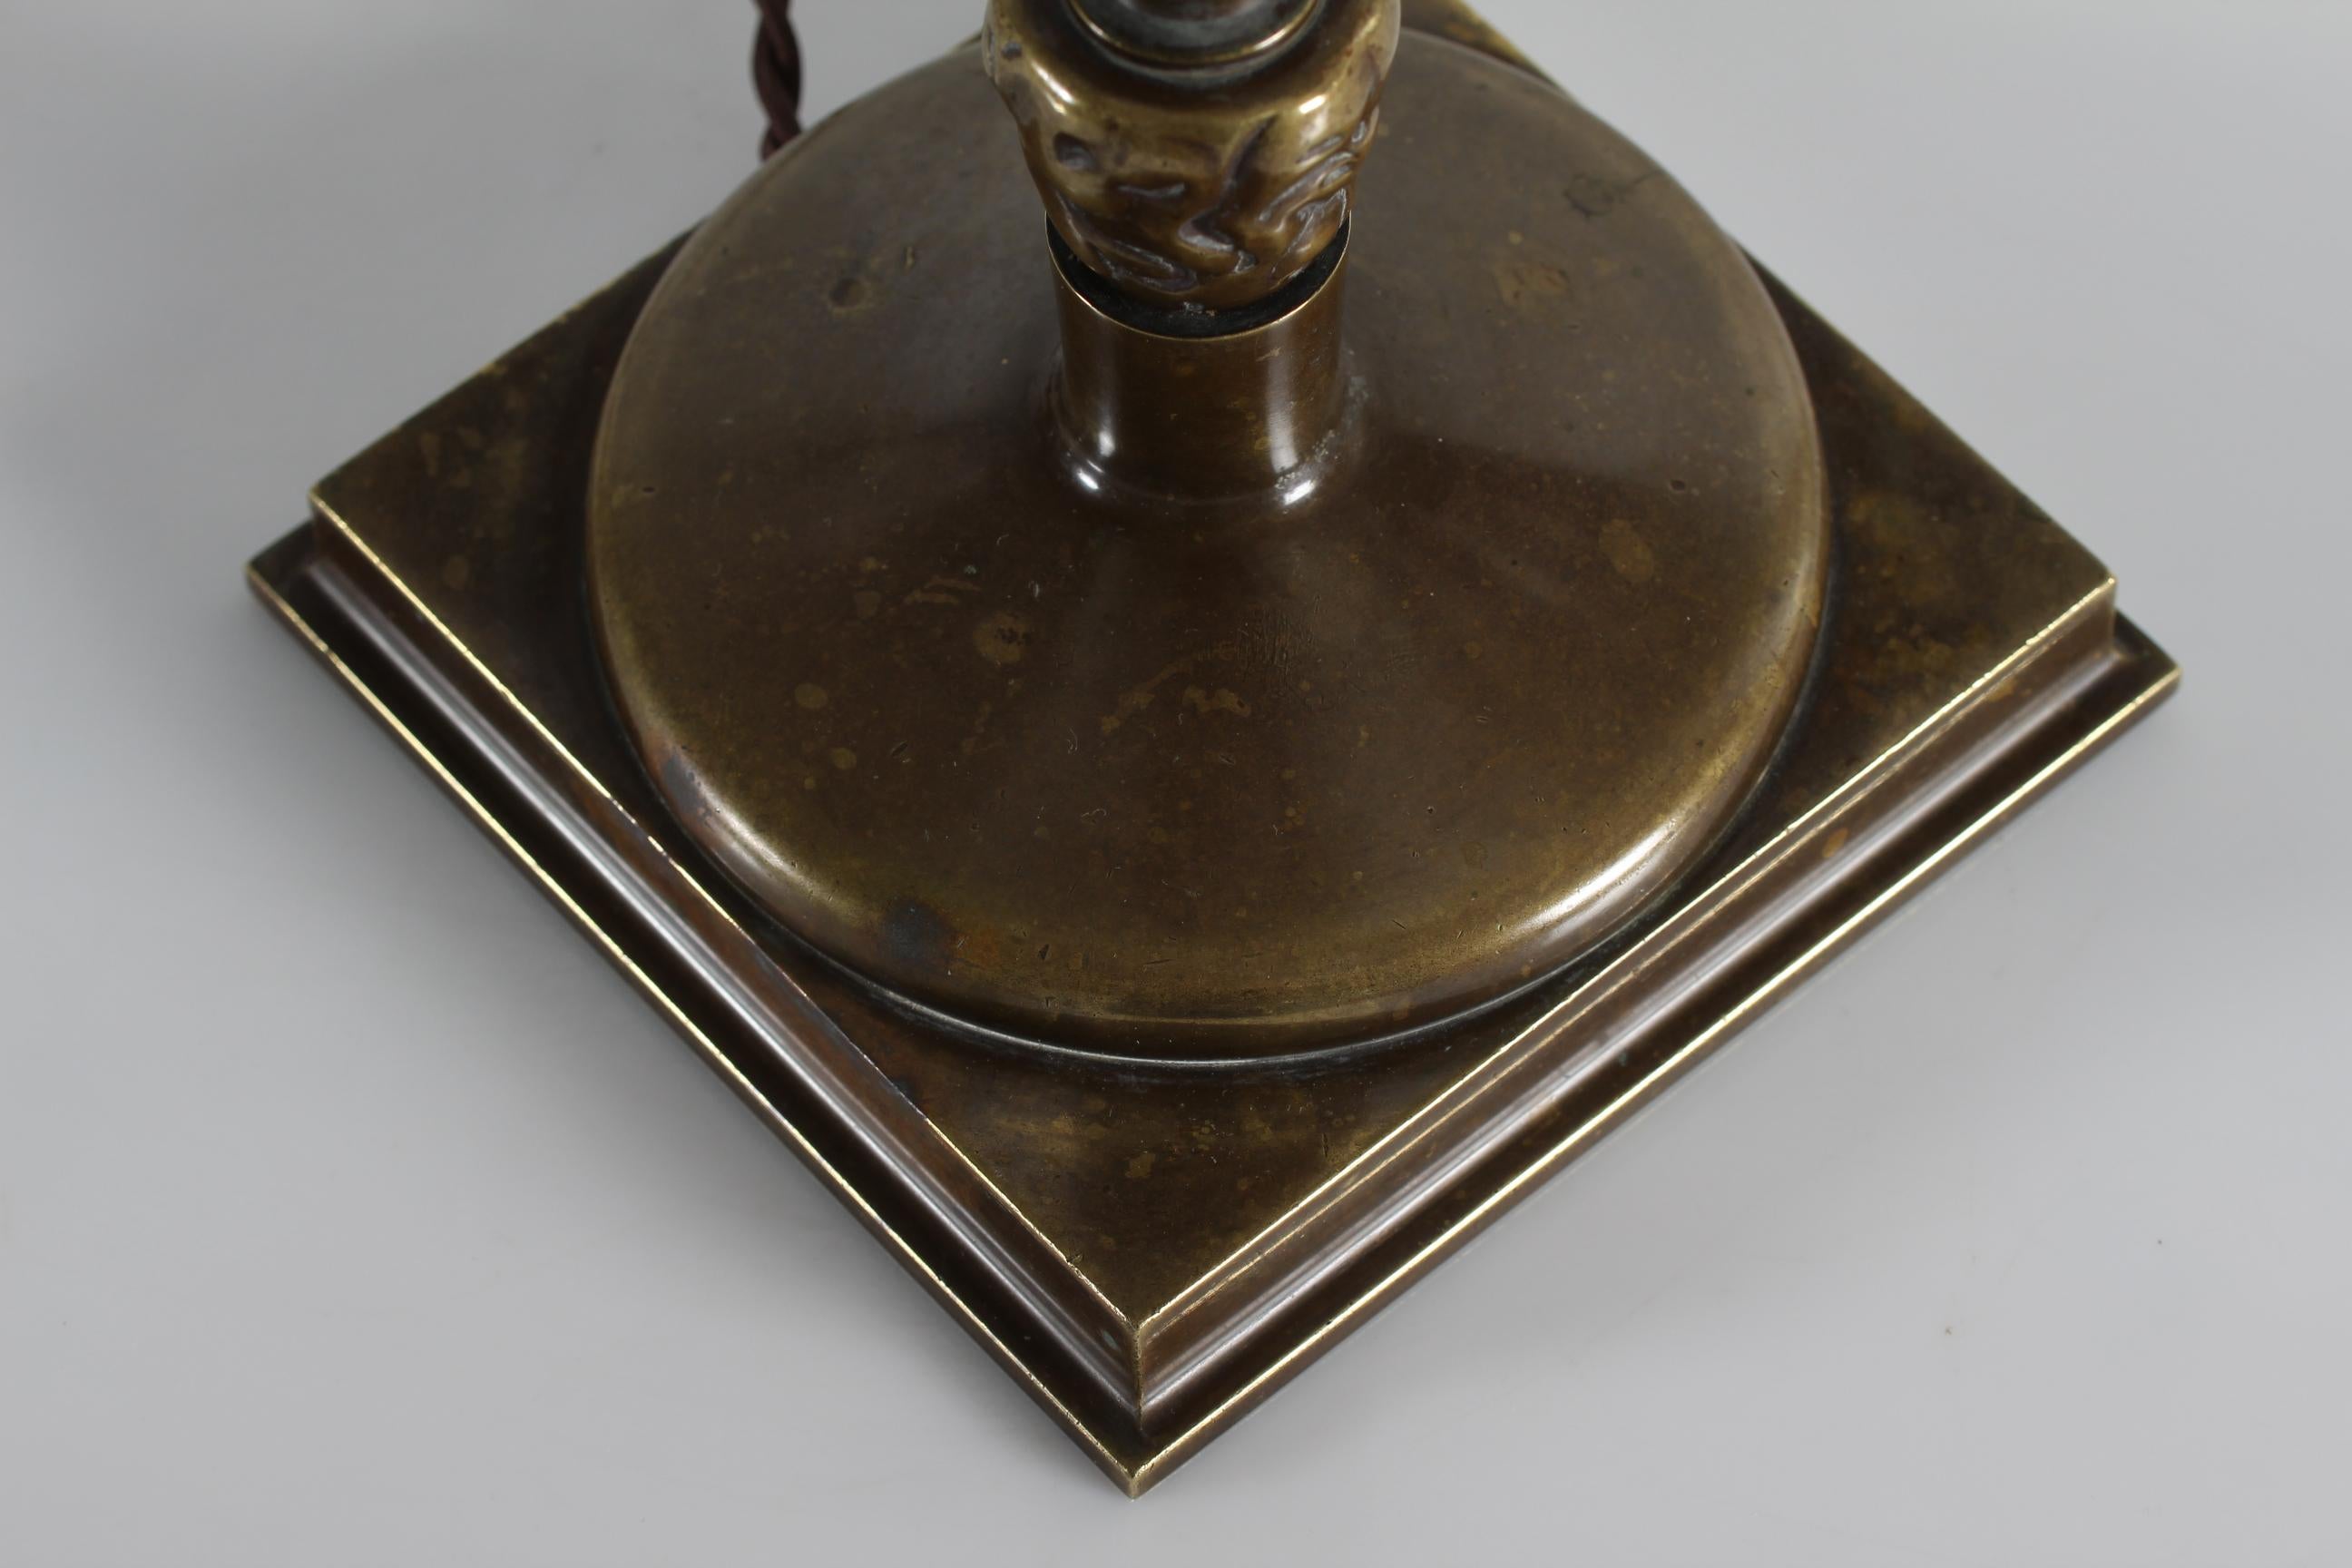 Danish Thorvald Bindesbøll High Art Nouveau Table Lamp 1890s Patinated Bronze For Sale 3